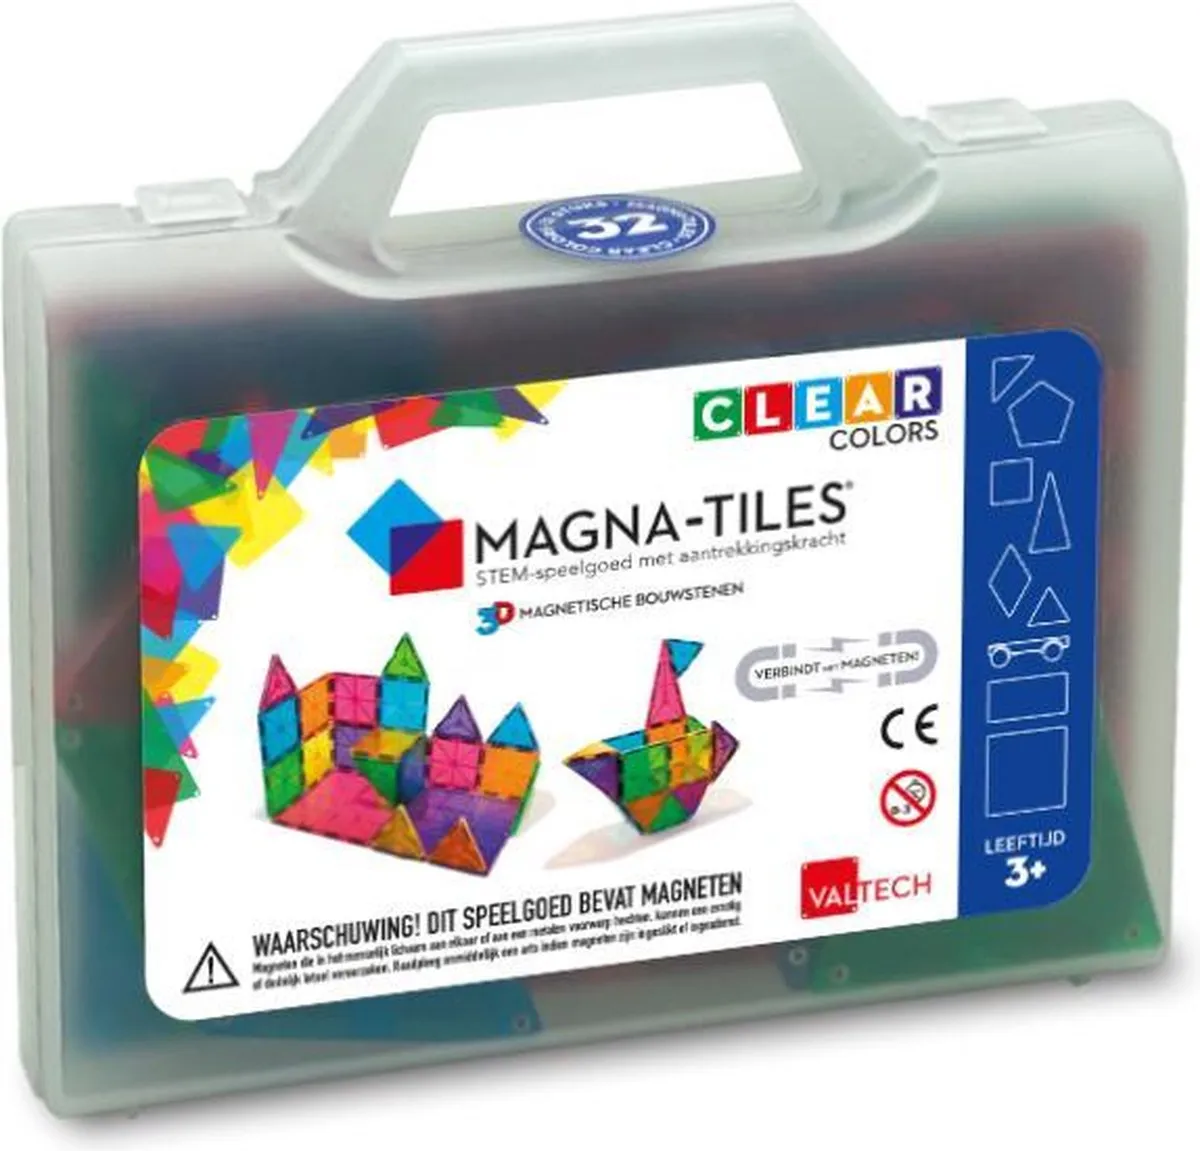 Magna-Tiles Clear Colors 32 in Bewaarkoffer - Magnetisch Speelgoed speelgoed